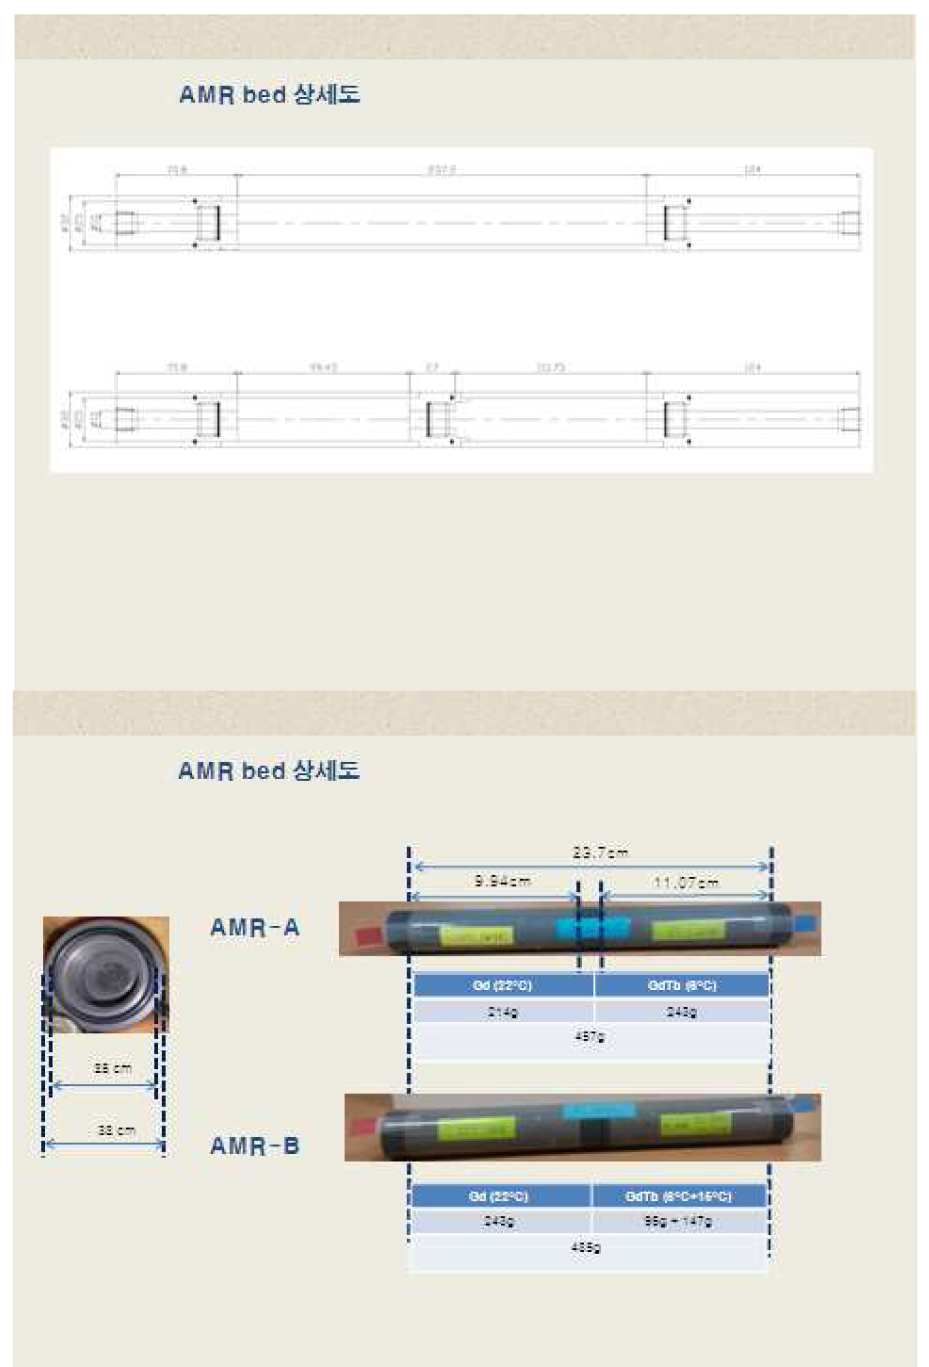 AMR bed 상세도